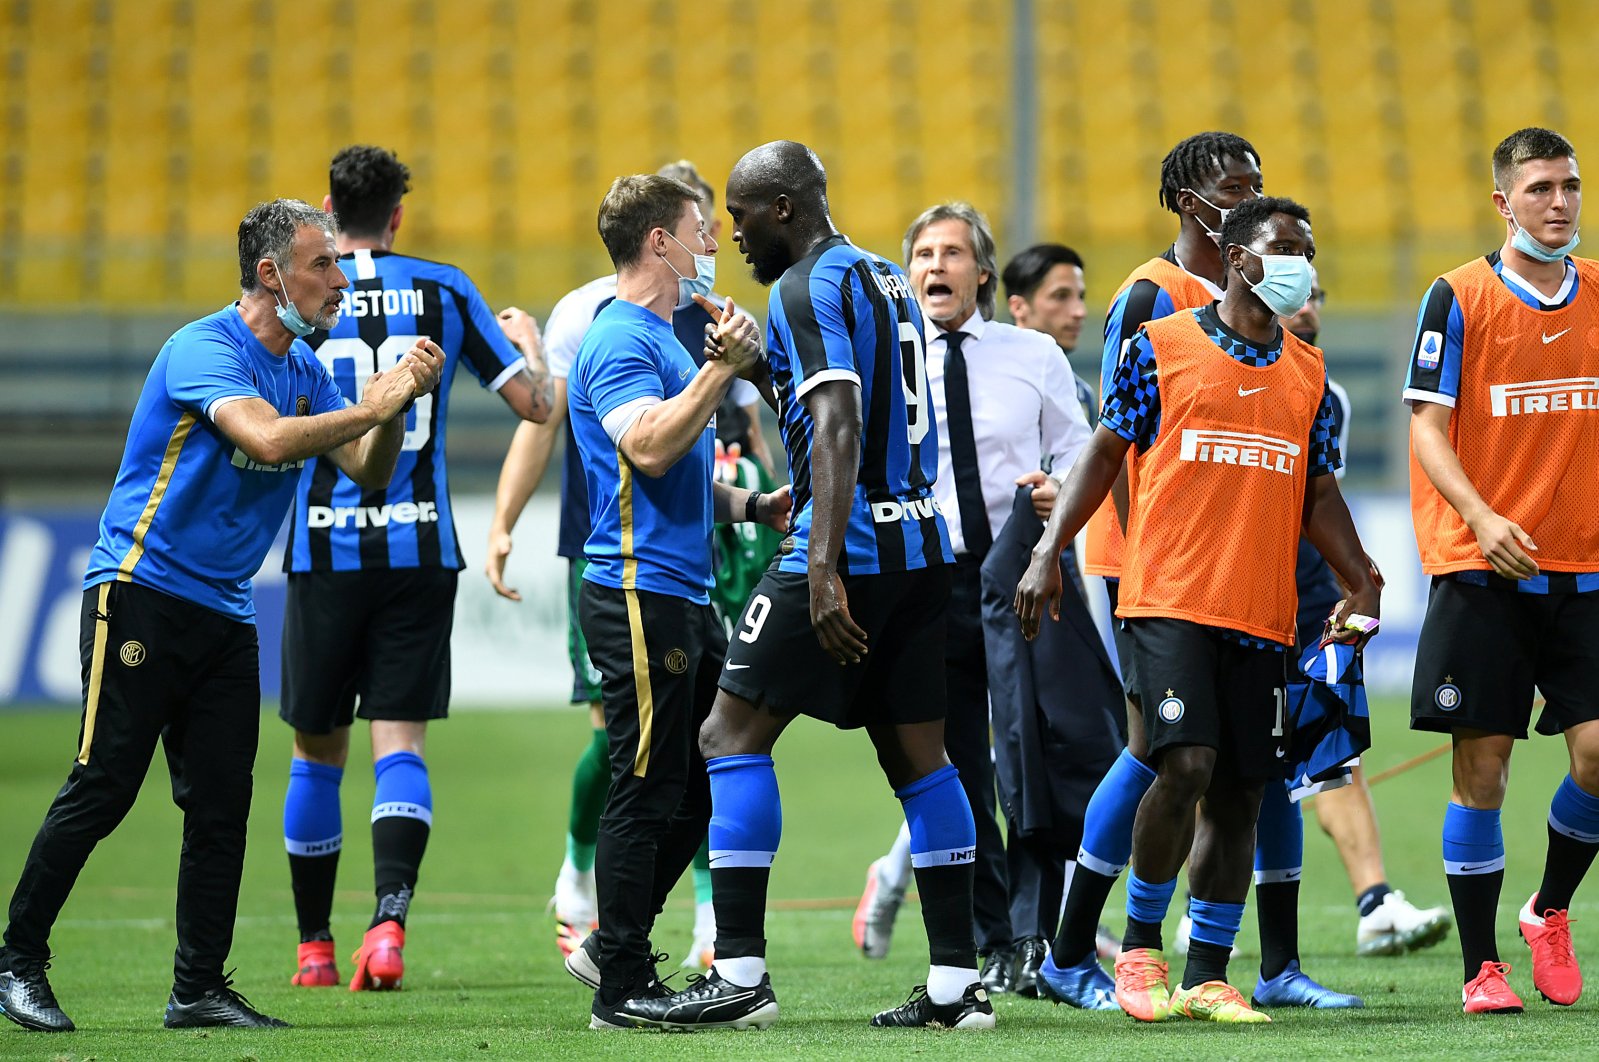 Inter Milan manager Gabriele Oriali with players after the Serie A match in Parma, Italy, June 28, 2020. (Reuters Photo)